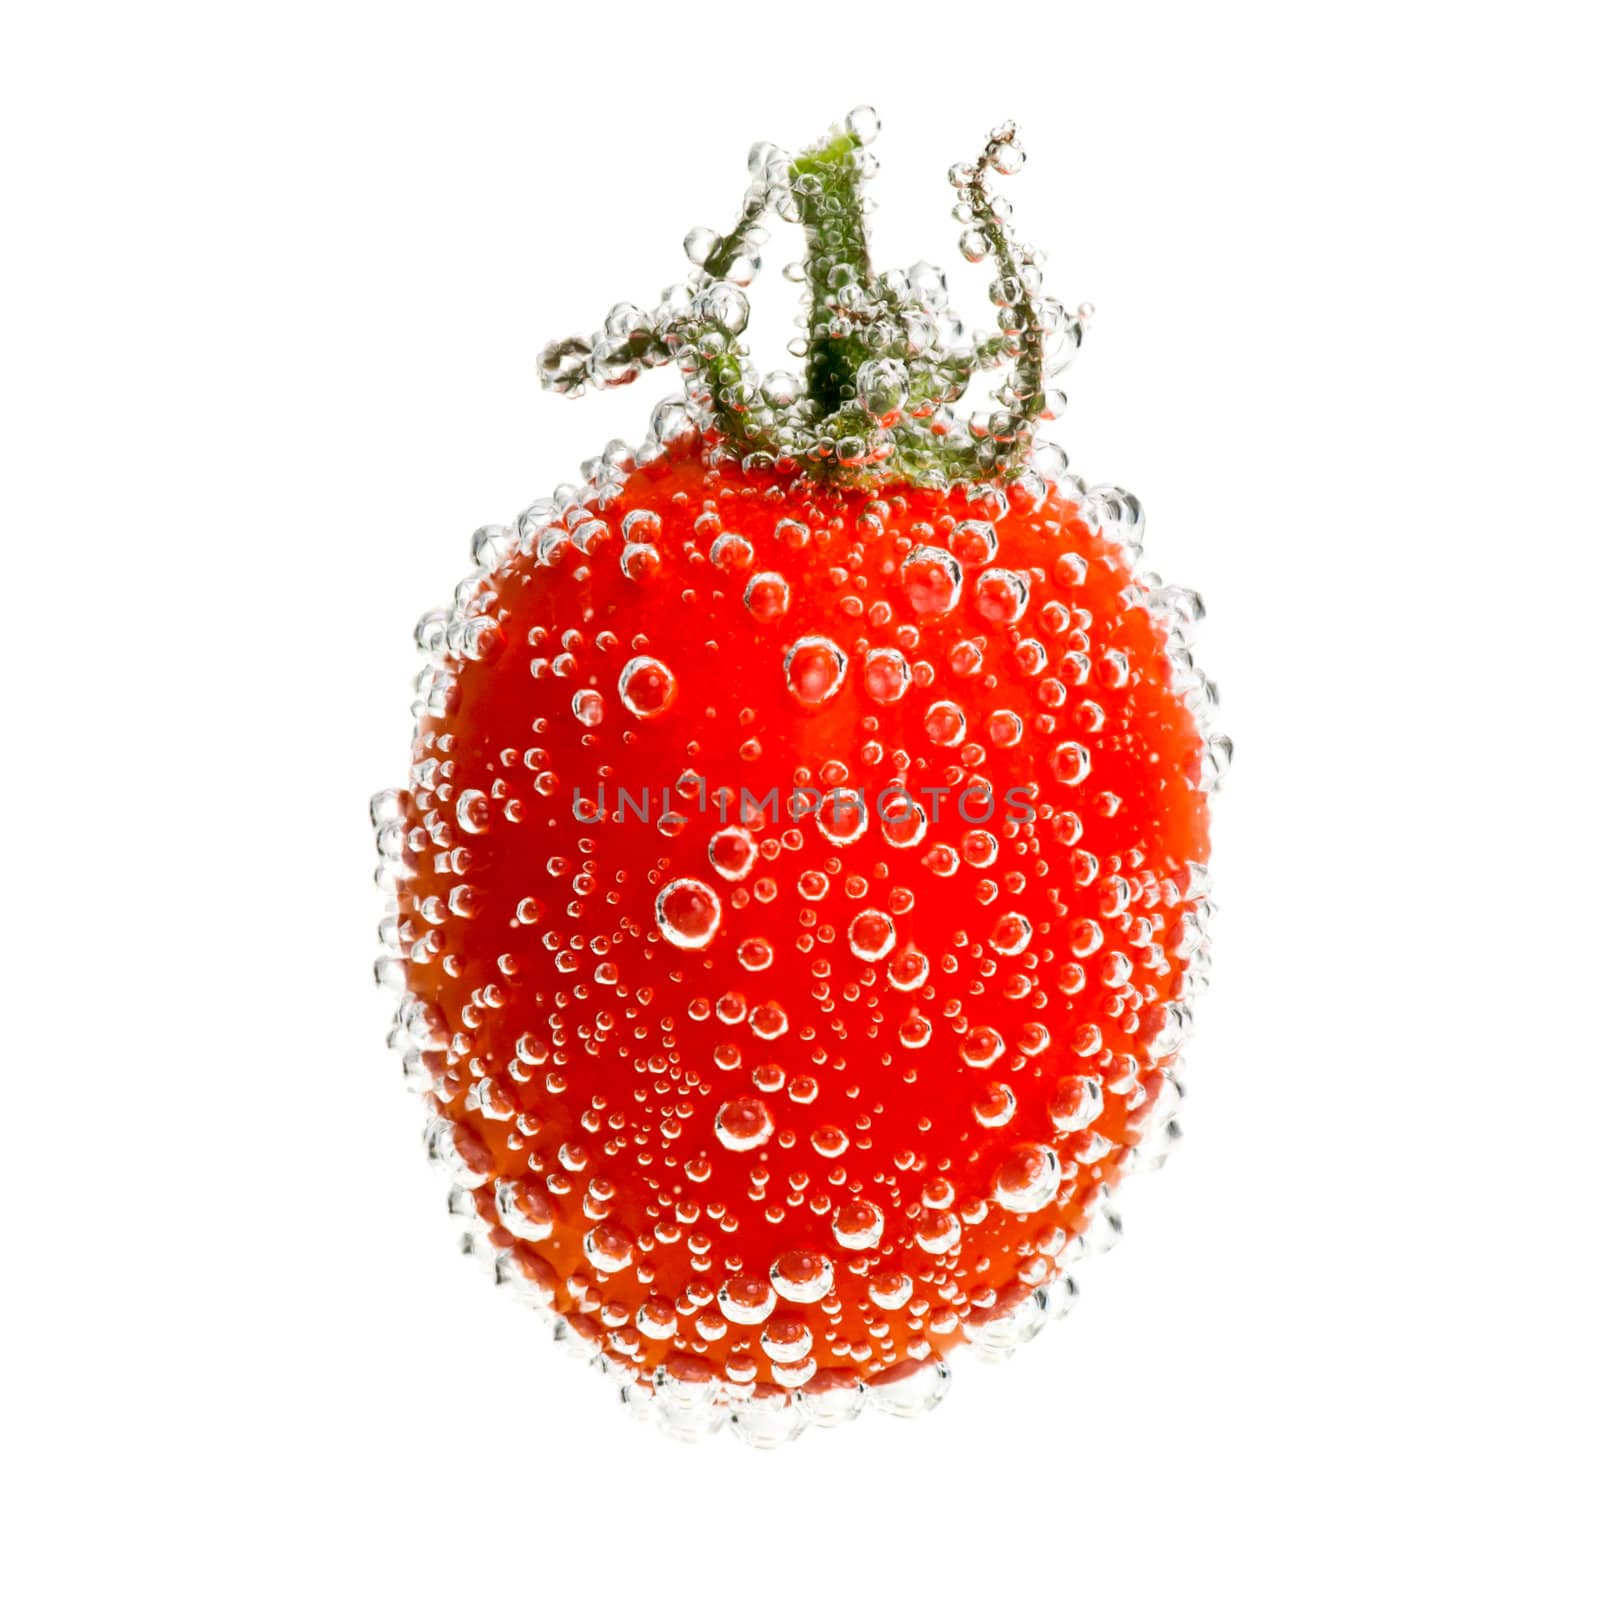 Cherry tomato in water with bubbles on white background